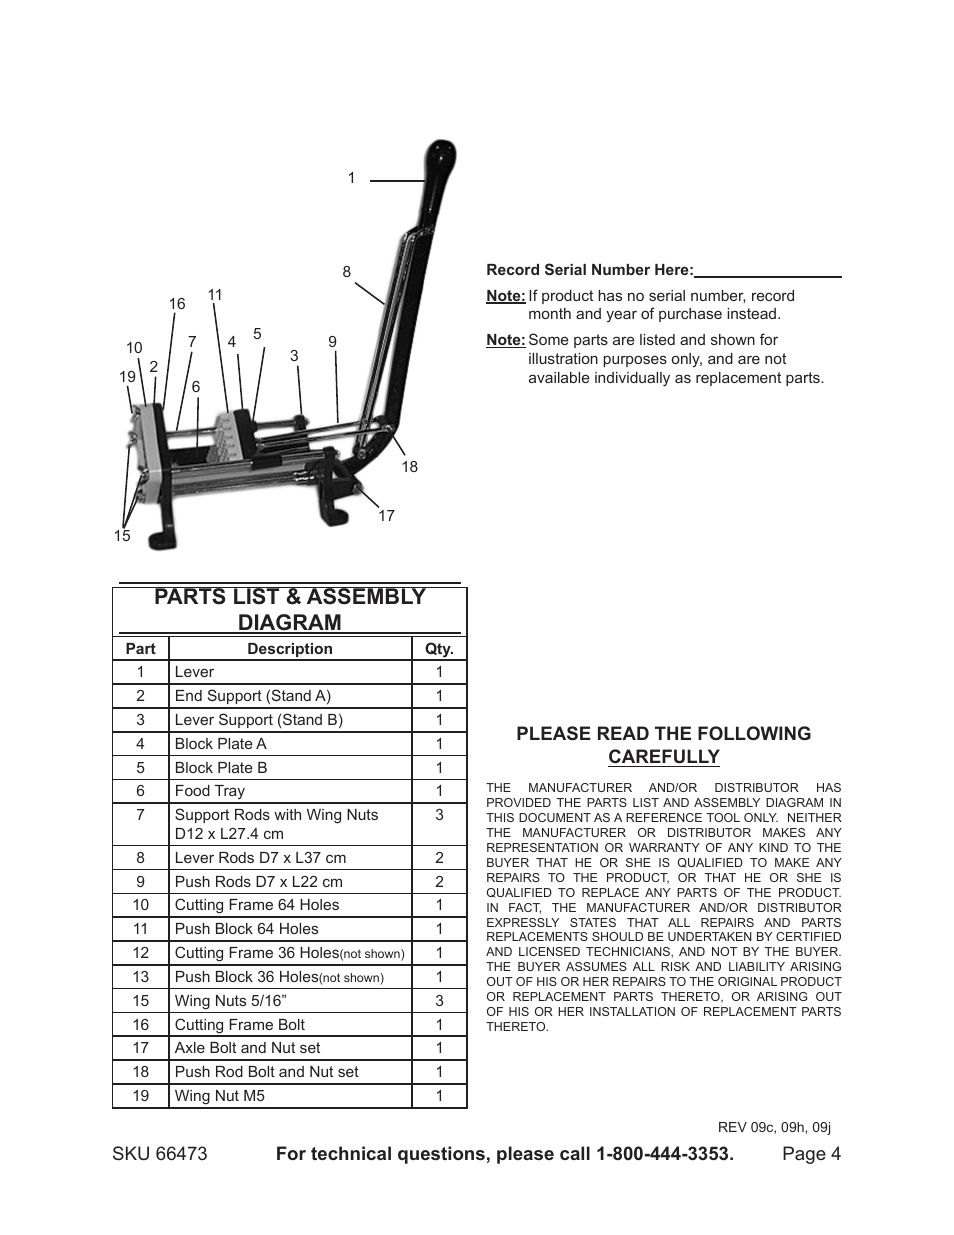 Parts list & assembly diagram | Harbor Freight Tools Heavy Duty French Fry  Cutter 66473 User Manual | Page 4 / 4 | Original mode